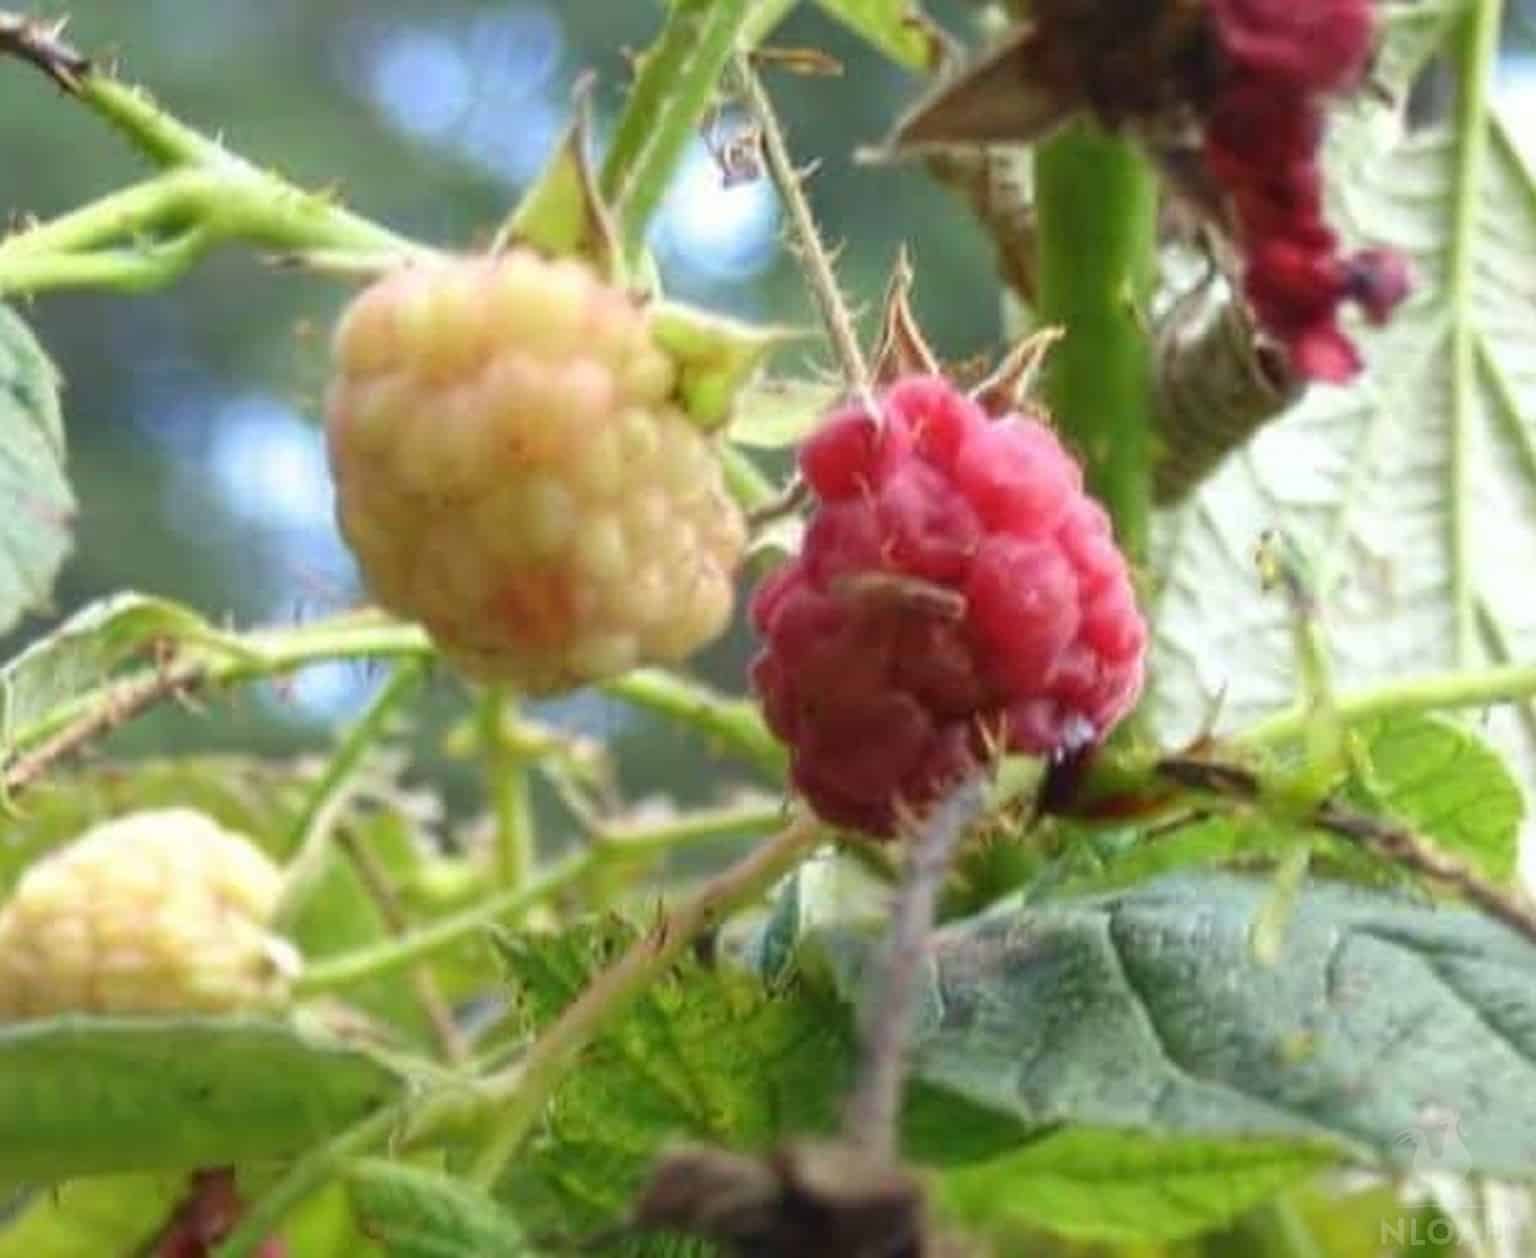 raspberries with worms